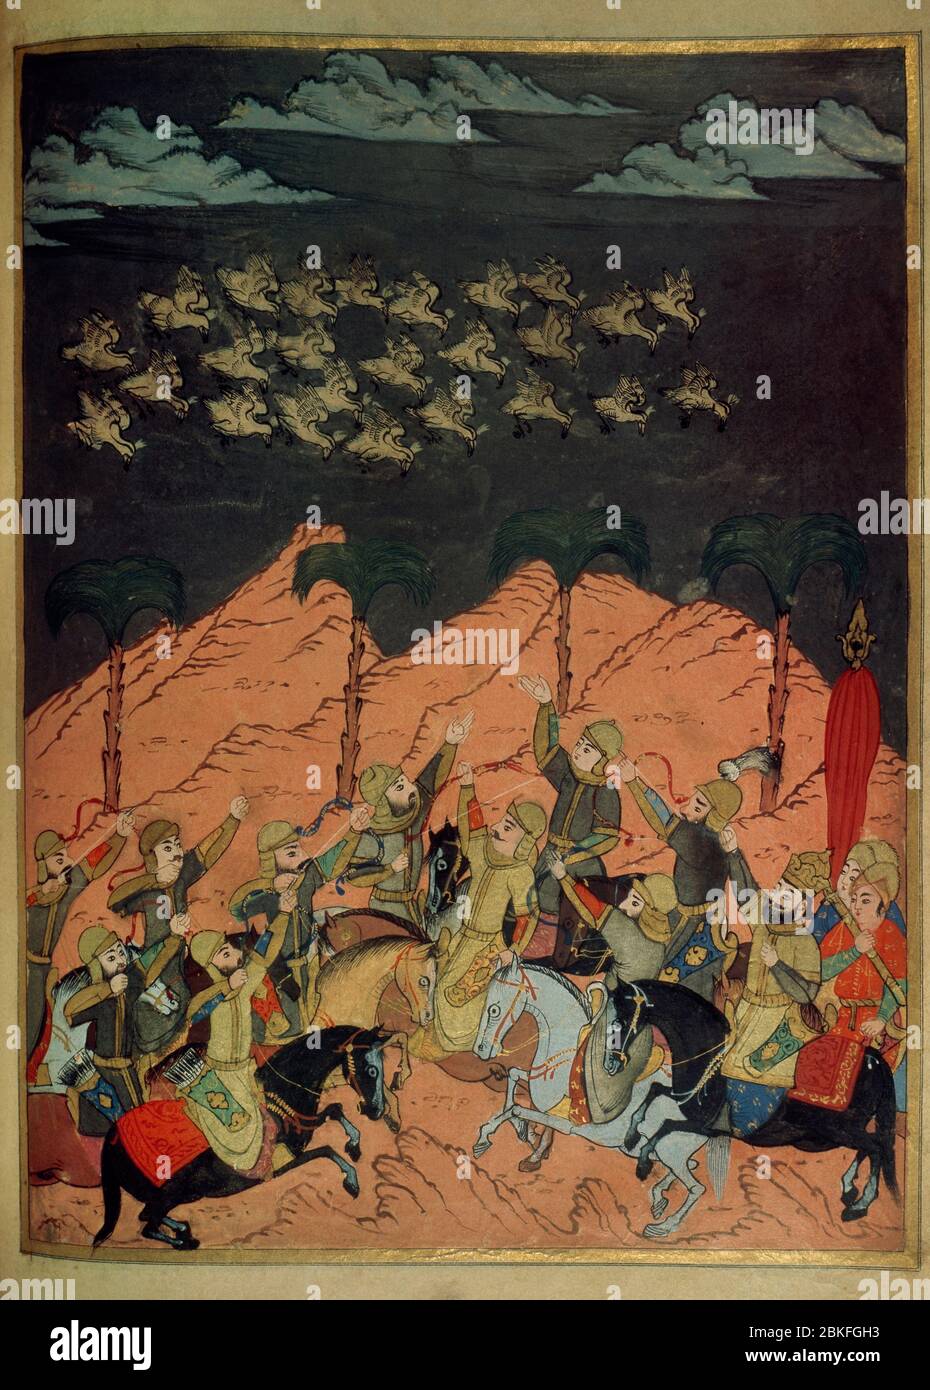 When Abrahah's forces neared the Kaaba, Allah commanded birds to destroy Yemenis' army, raining down pebbles on it from their beaks. Abrahah retreated towards Yemen. Persian miniature. Topkapi Museum. Istanbul, Turkey. Stock Photo